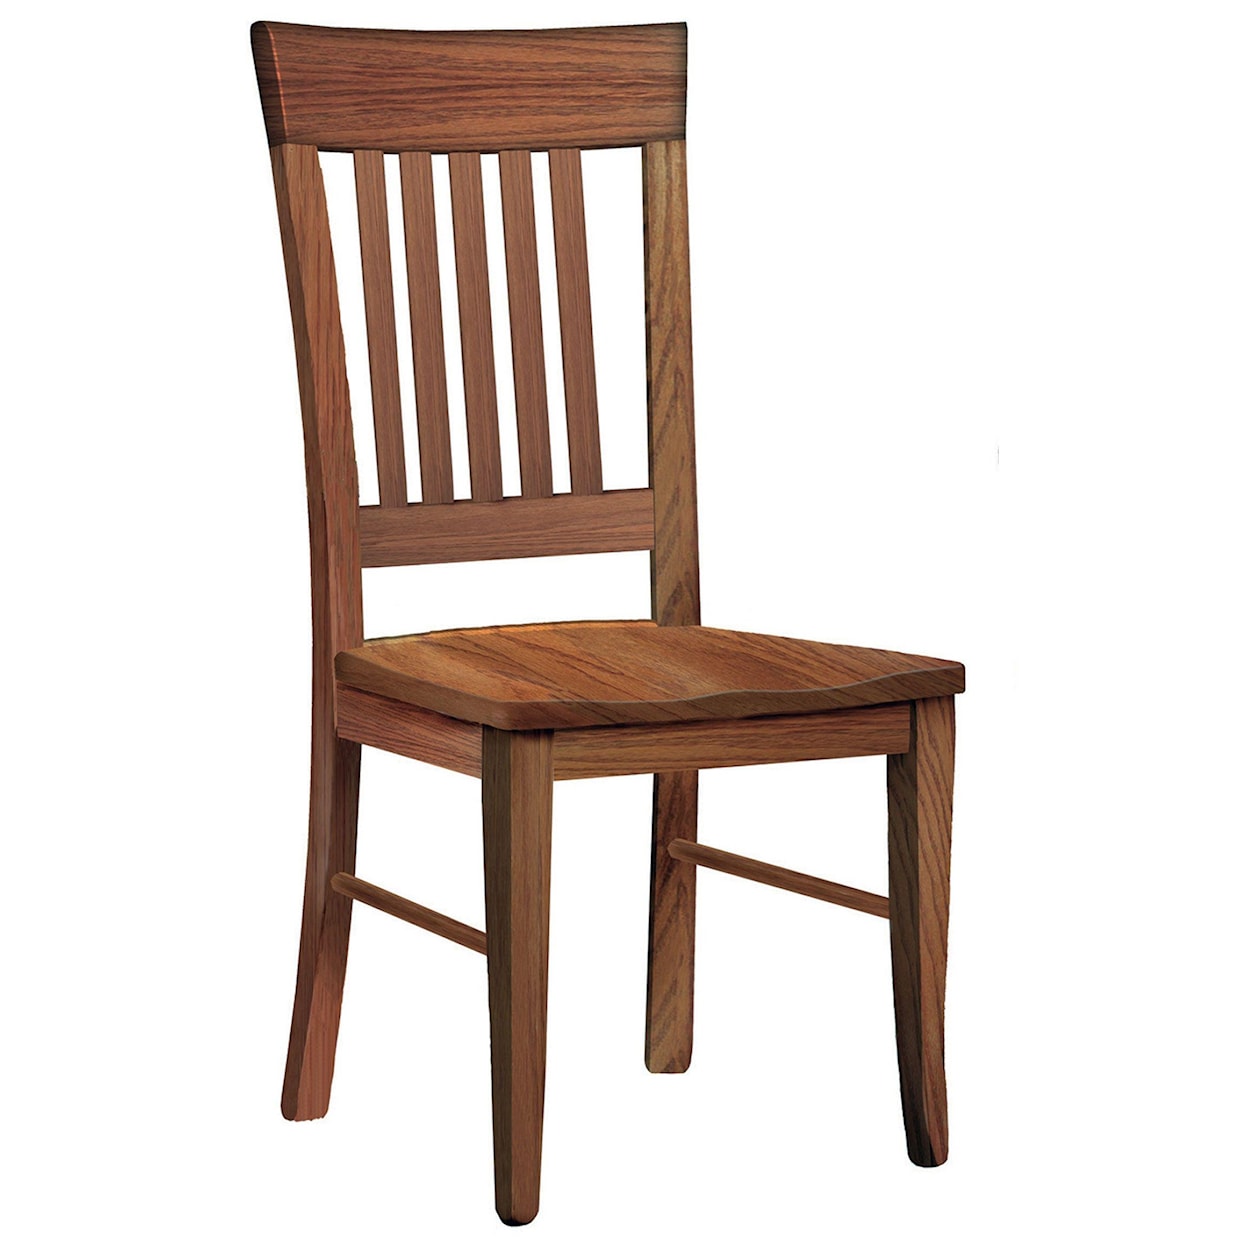 Wengerd Wood Products Ottawa Side Chair